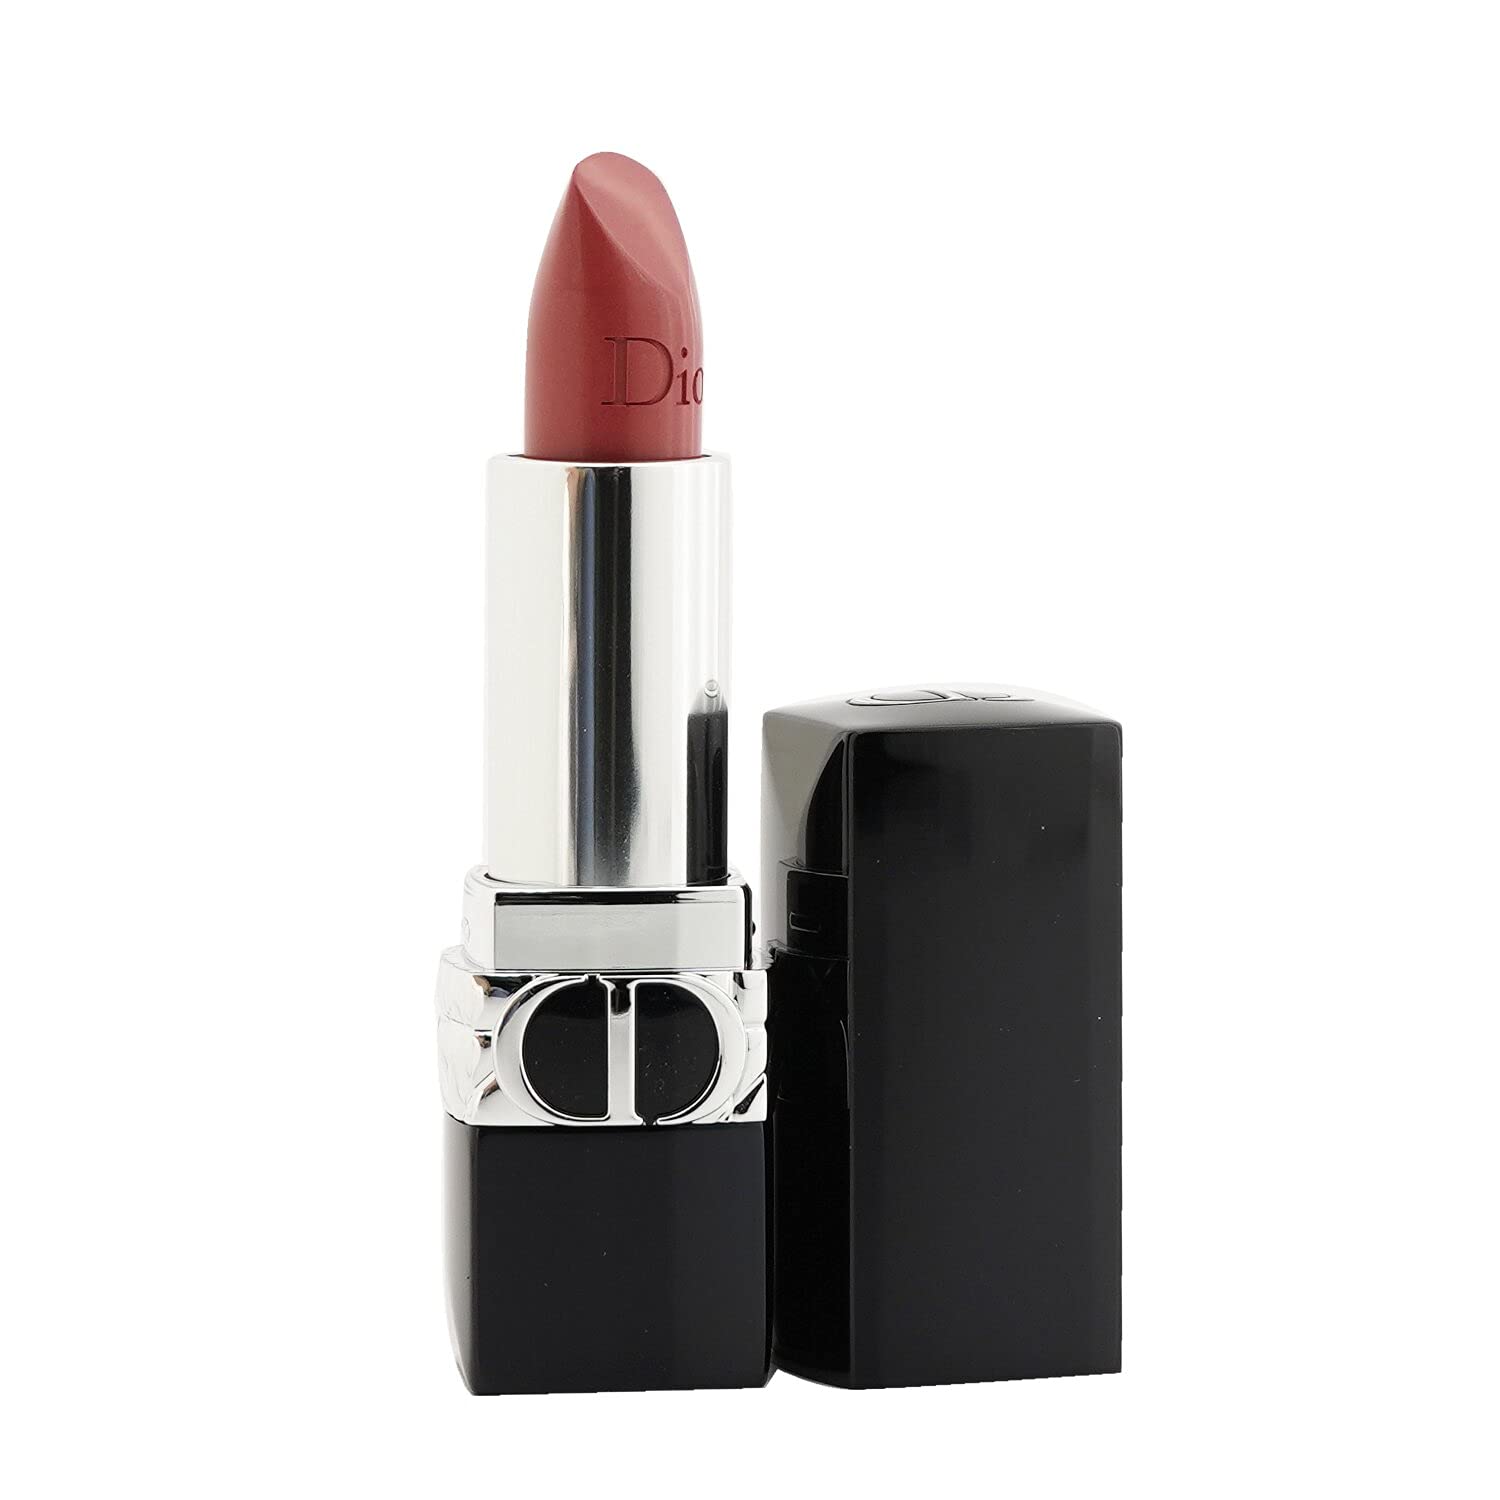 Dior Rouge refillable lipstick